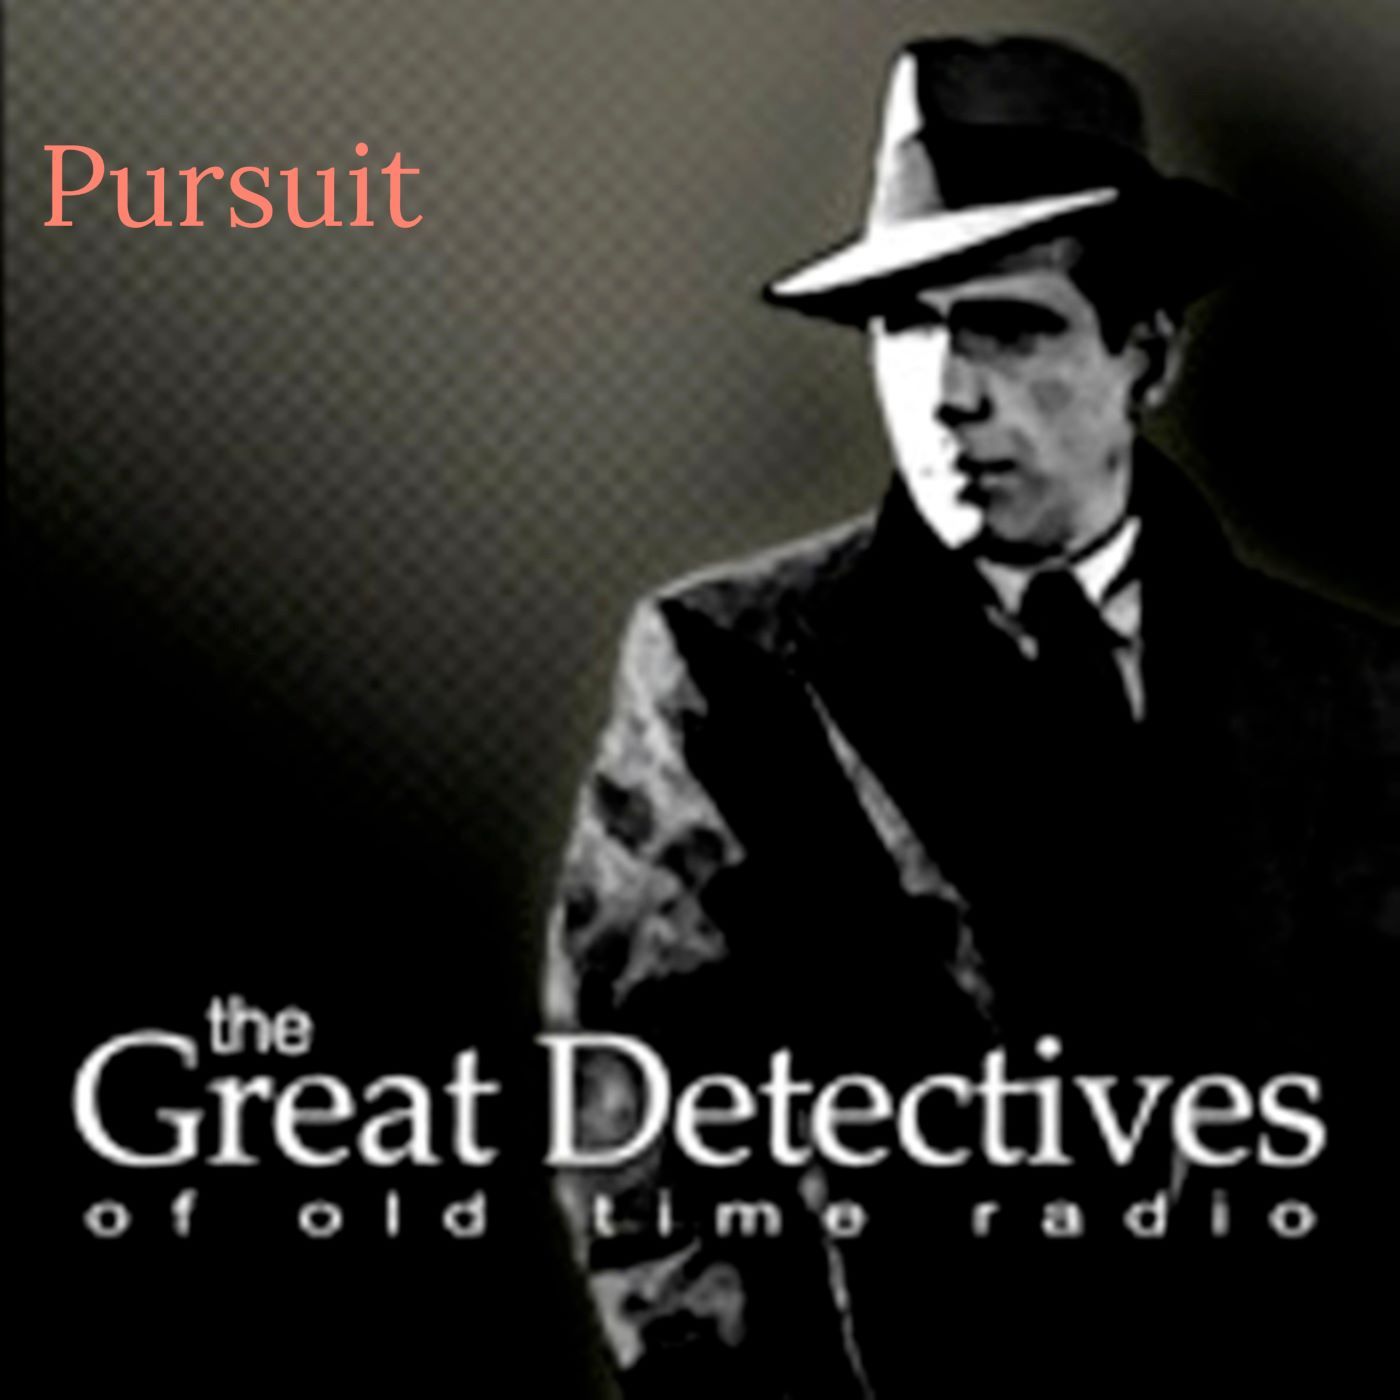 EP1347: Pursuit: Pursuit of the Woman in Grey